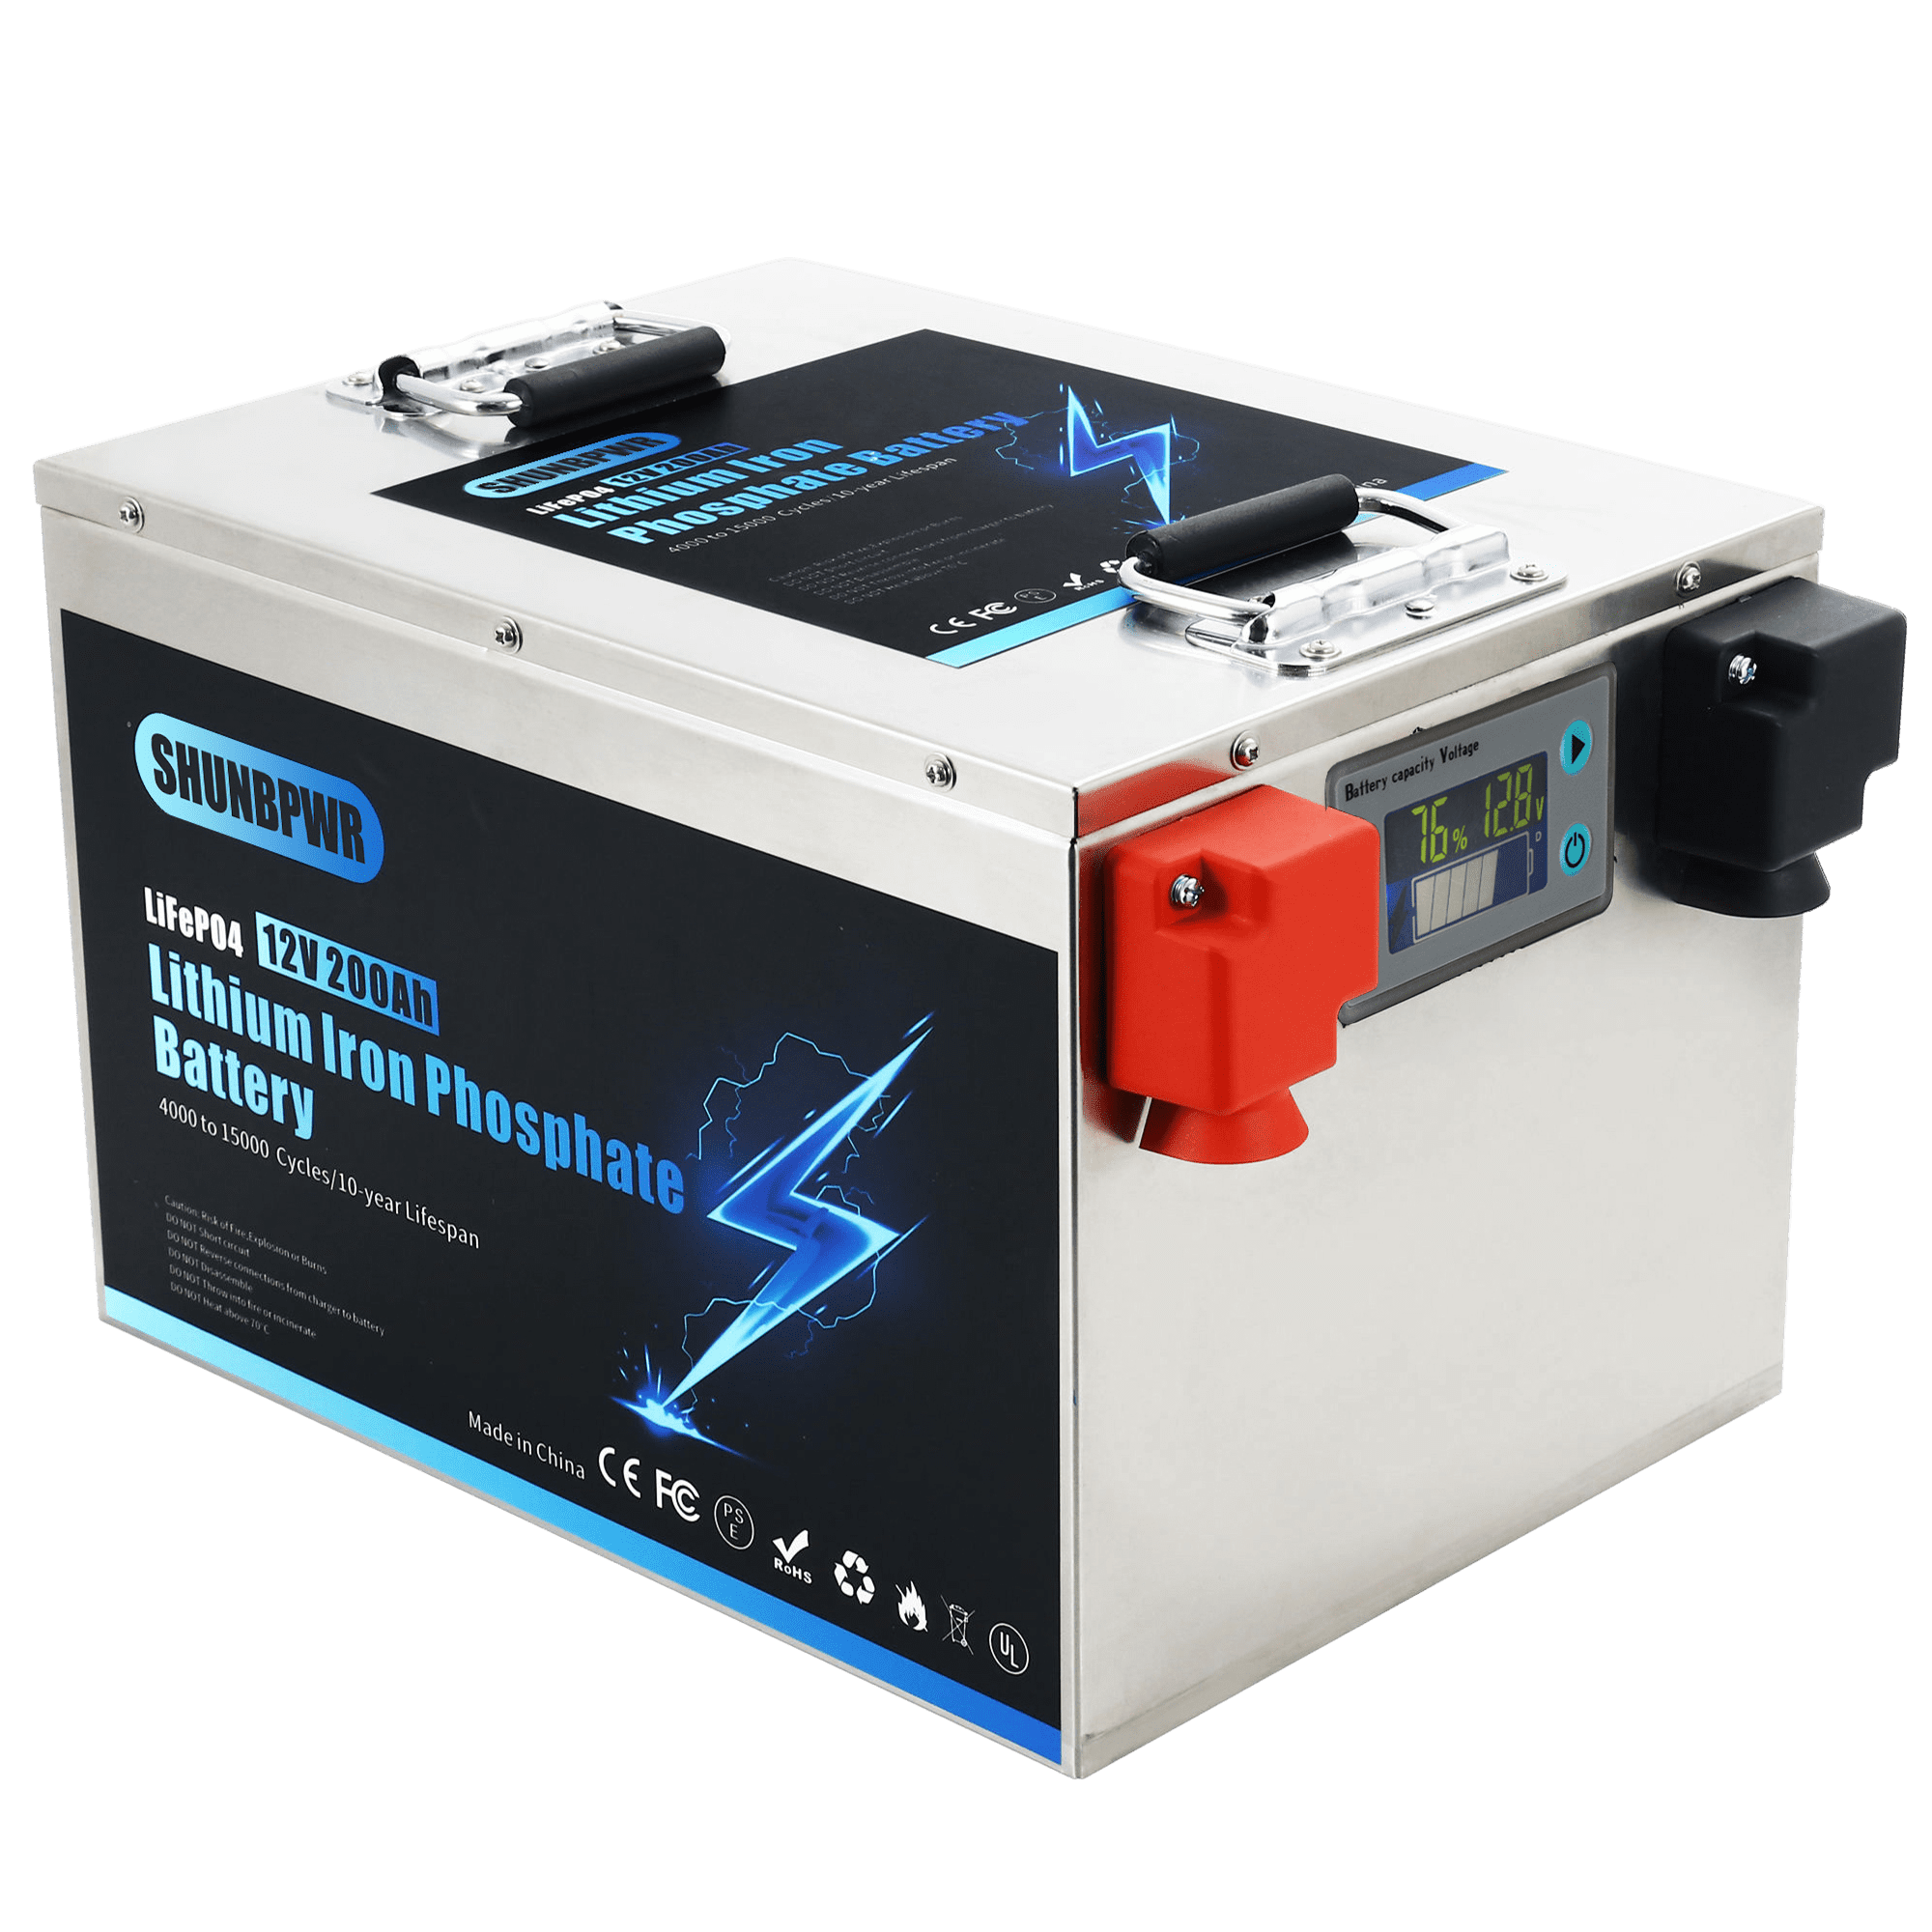 Deep Cycle Battery, RV Battery, 200AH Lithium Battery